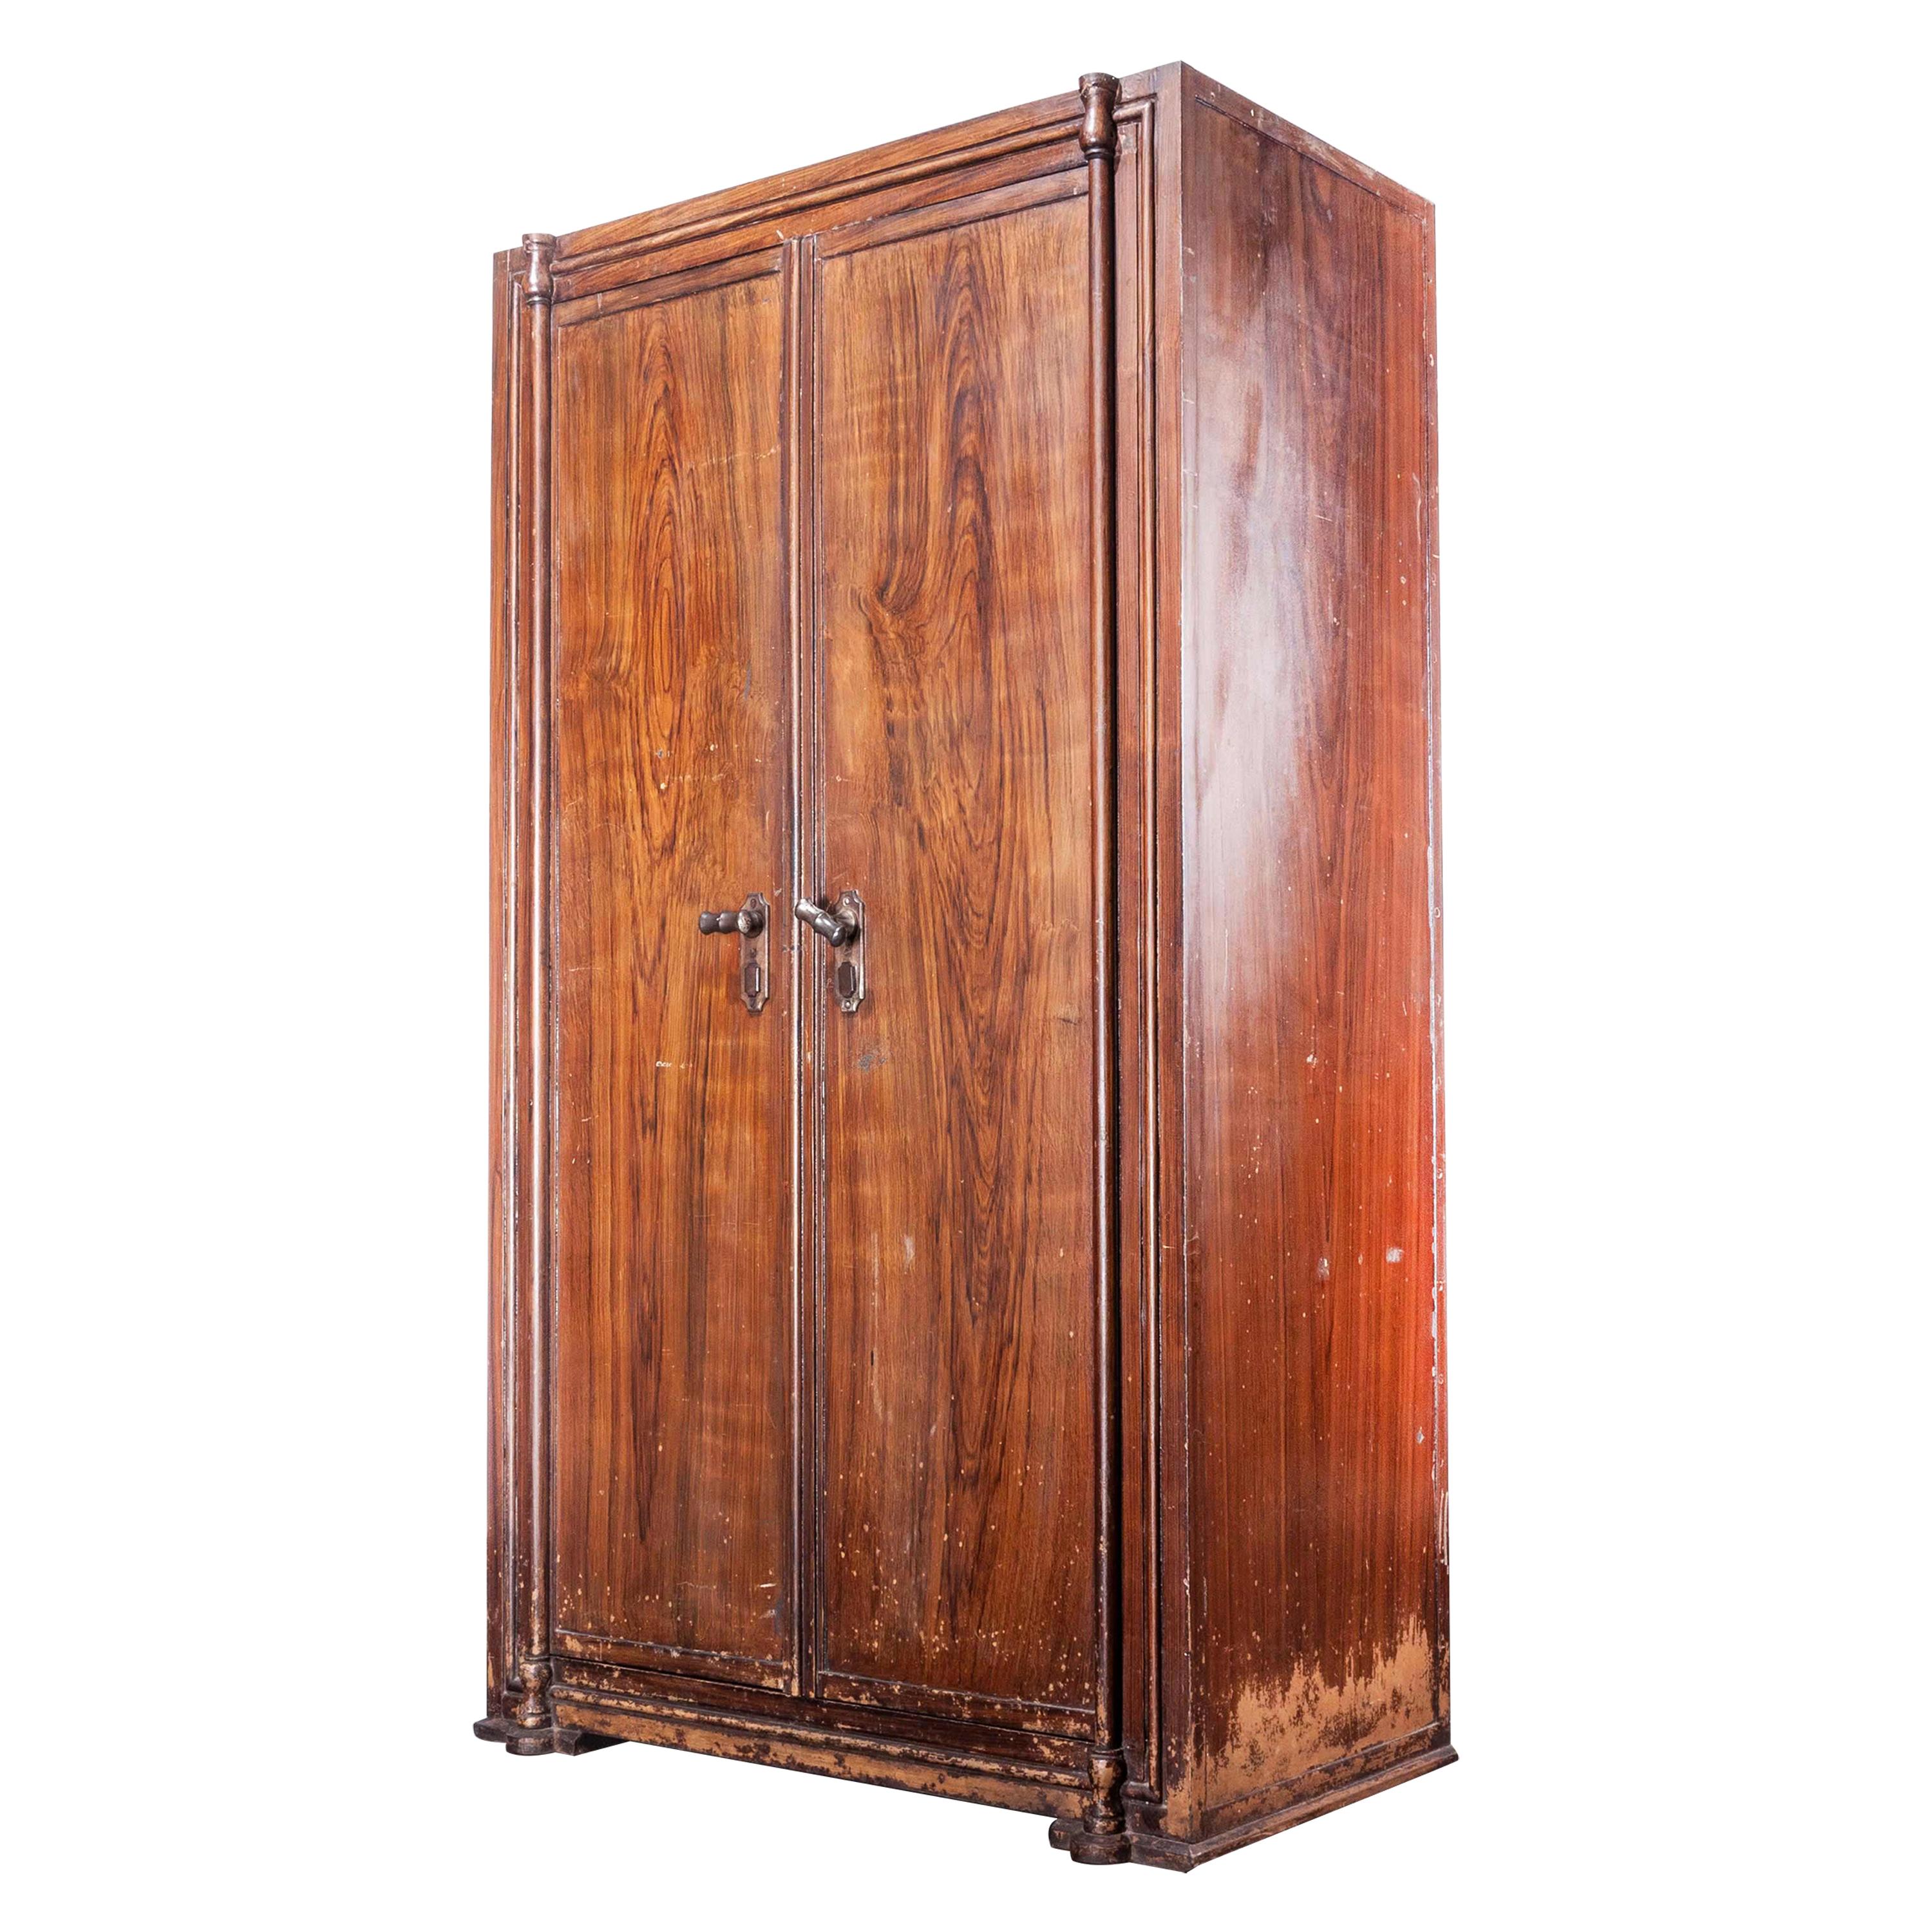 1890s Original Patented Fireproof Large Cabinet by Tanczos of Vienna